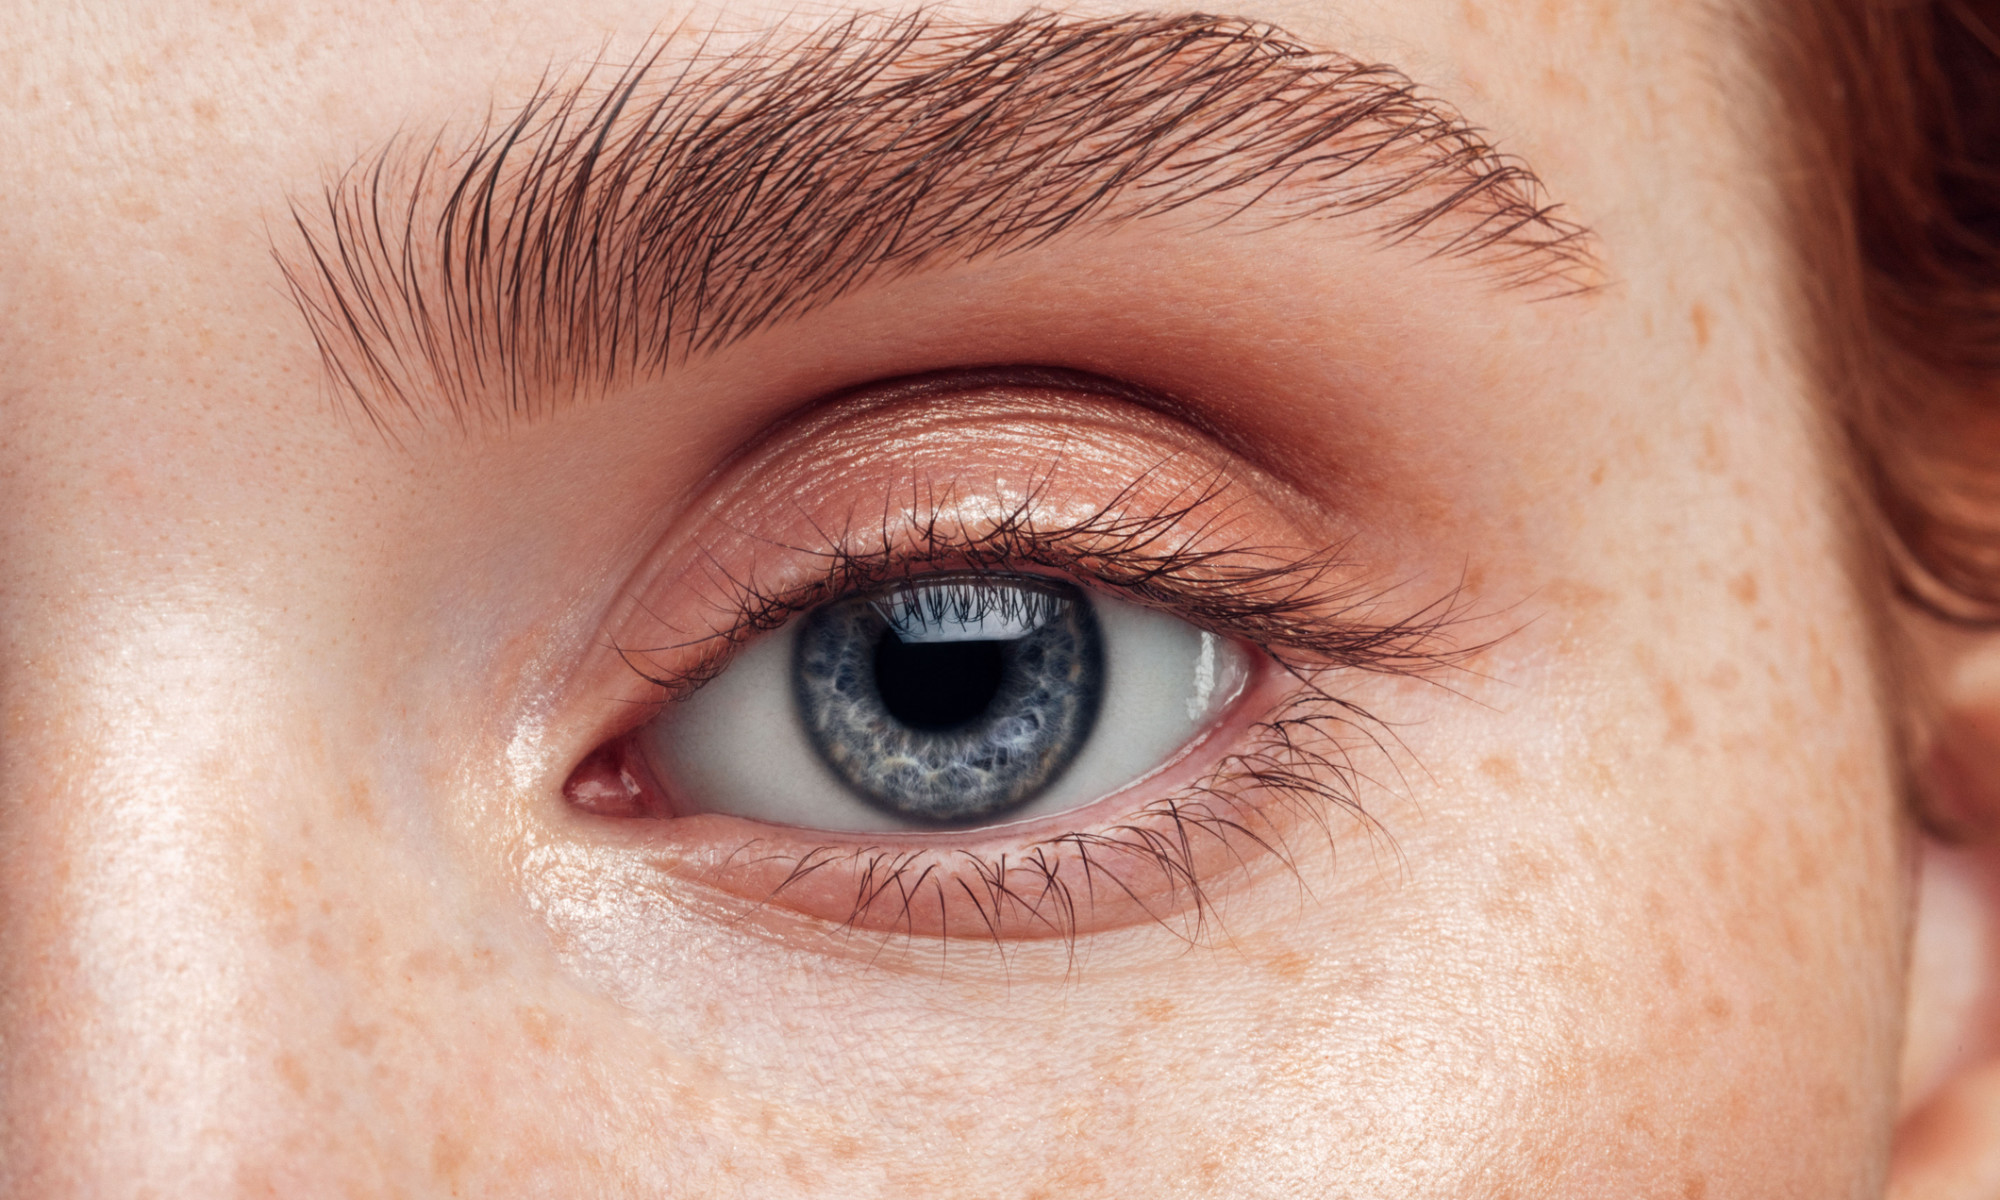 How To Use Lutein For Eyes By Food regimen & Supplementation